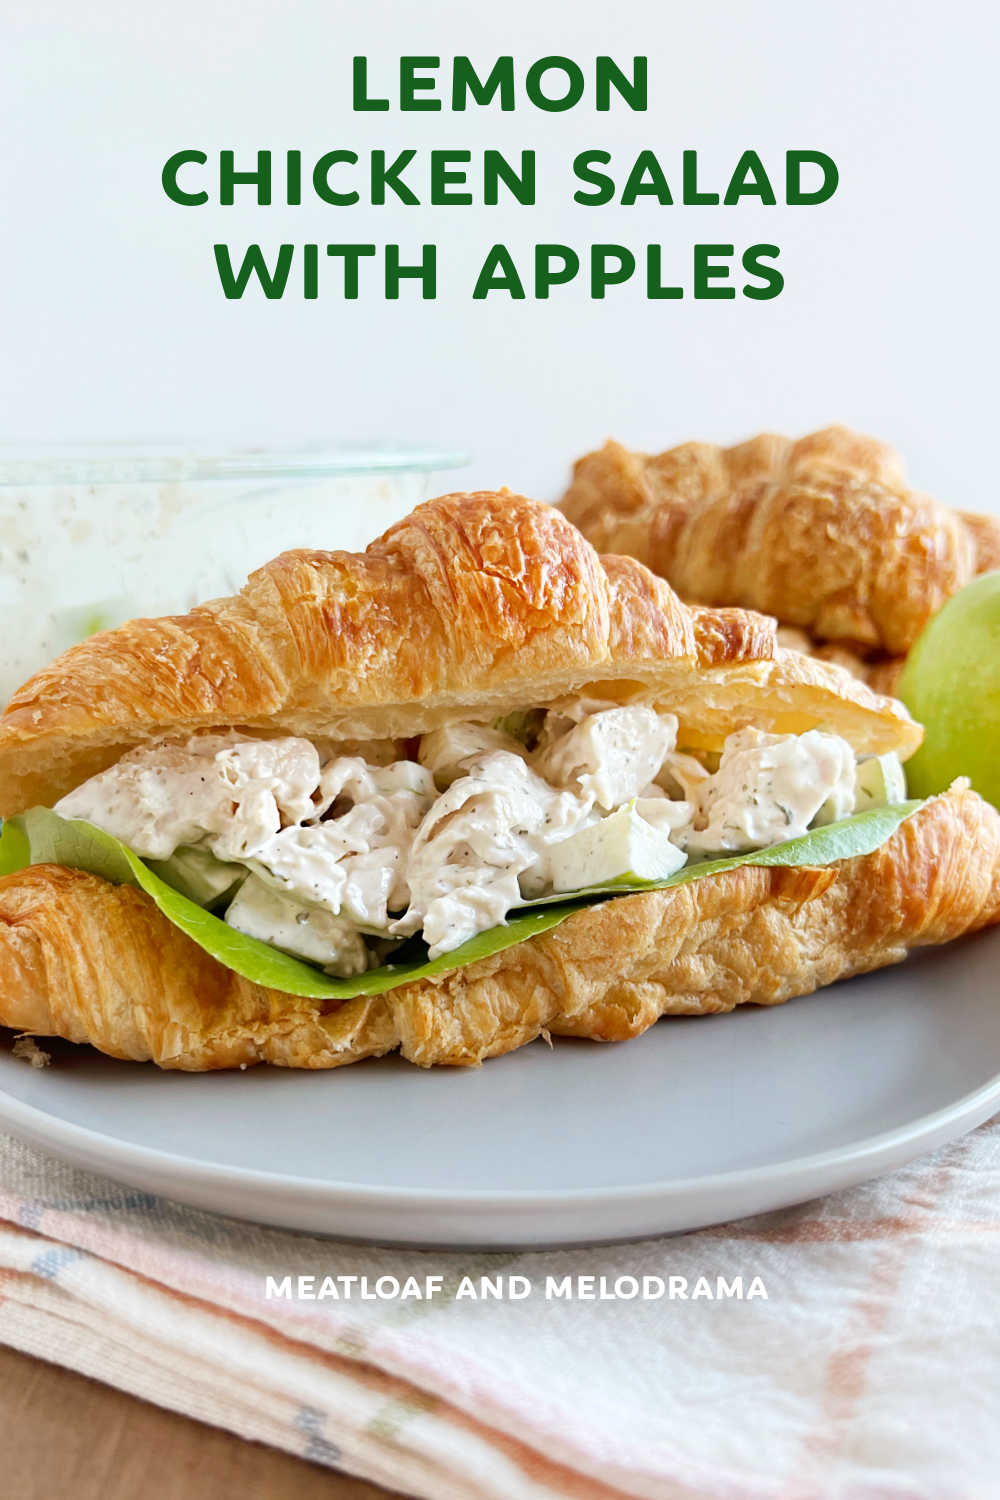 Lemon Chicken Salad Recipe with Apples is an easy chicken salad with a light lemony dressing. Perfect for a light lunch or dinner! Serve over fresh salad greens, in a sandwich or in wraps. via @meamel